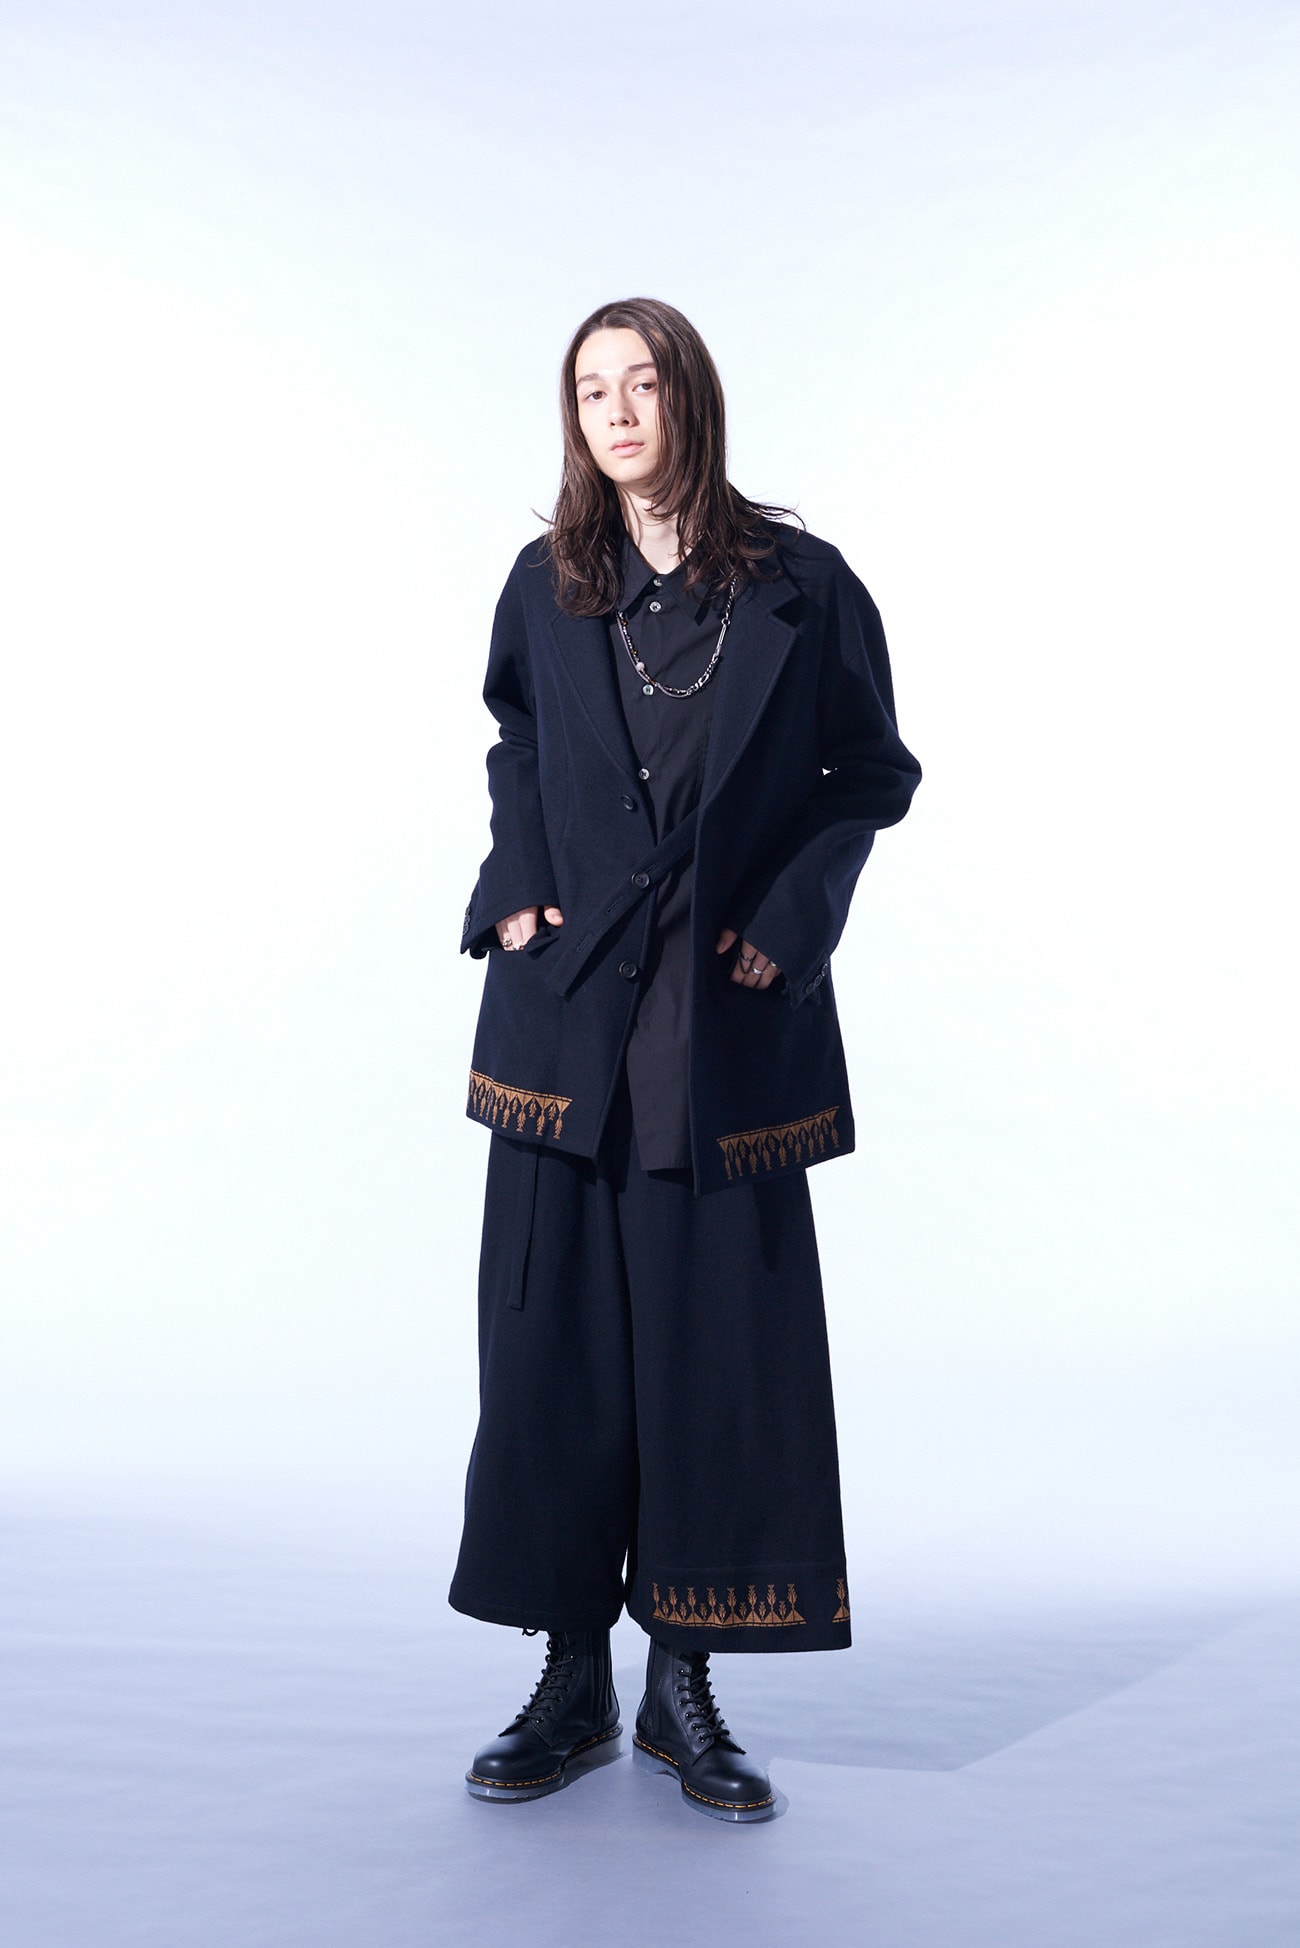 COMPRESSED JERSEY ETHNIC EMBROIDERED JACKET